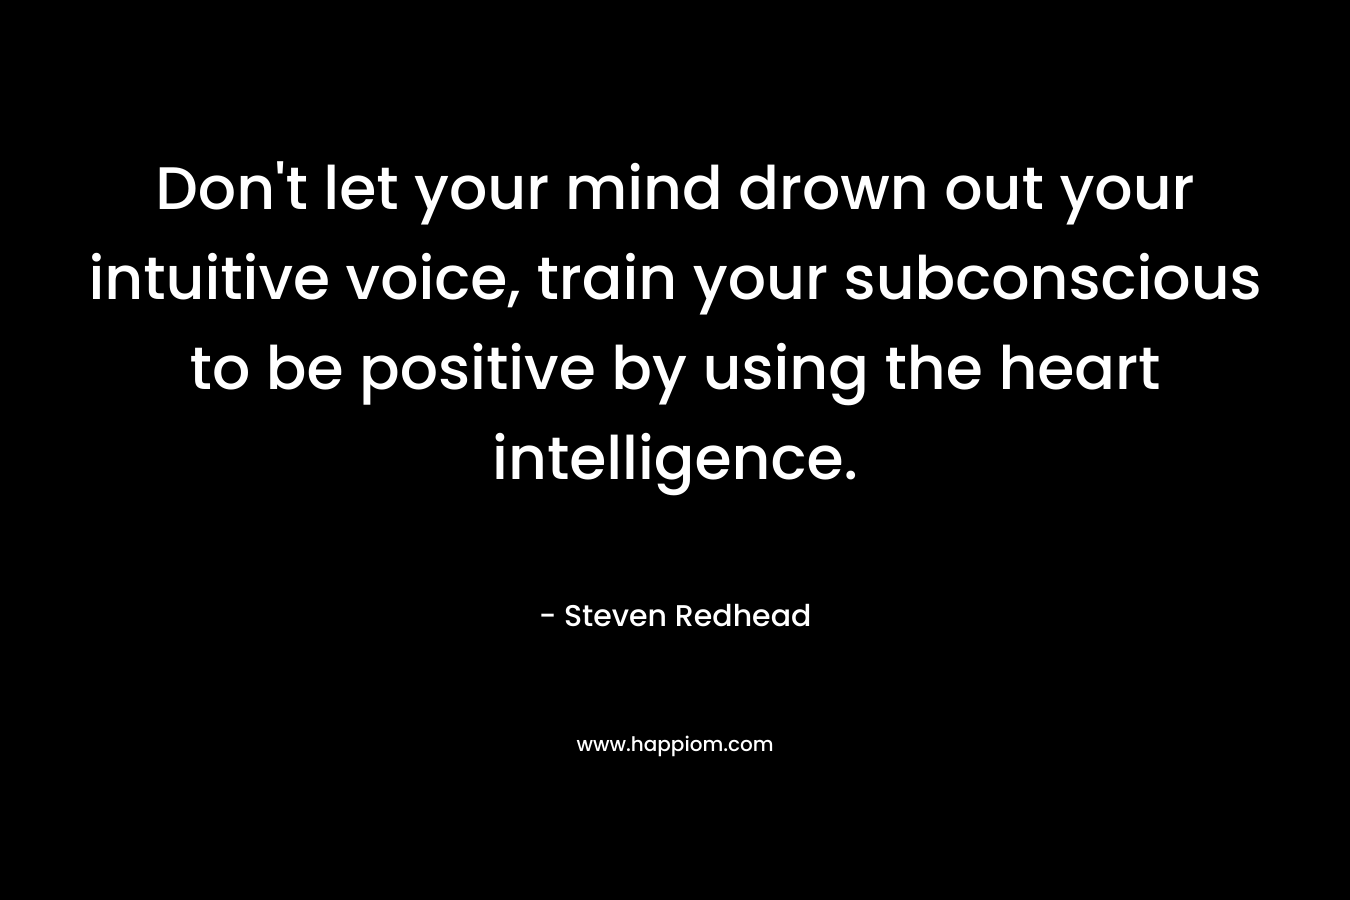 Don't let your mind drown out your intuitive voice, train your subconscious to be positive by using the heart intelligence.